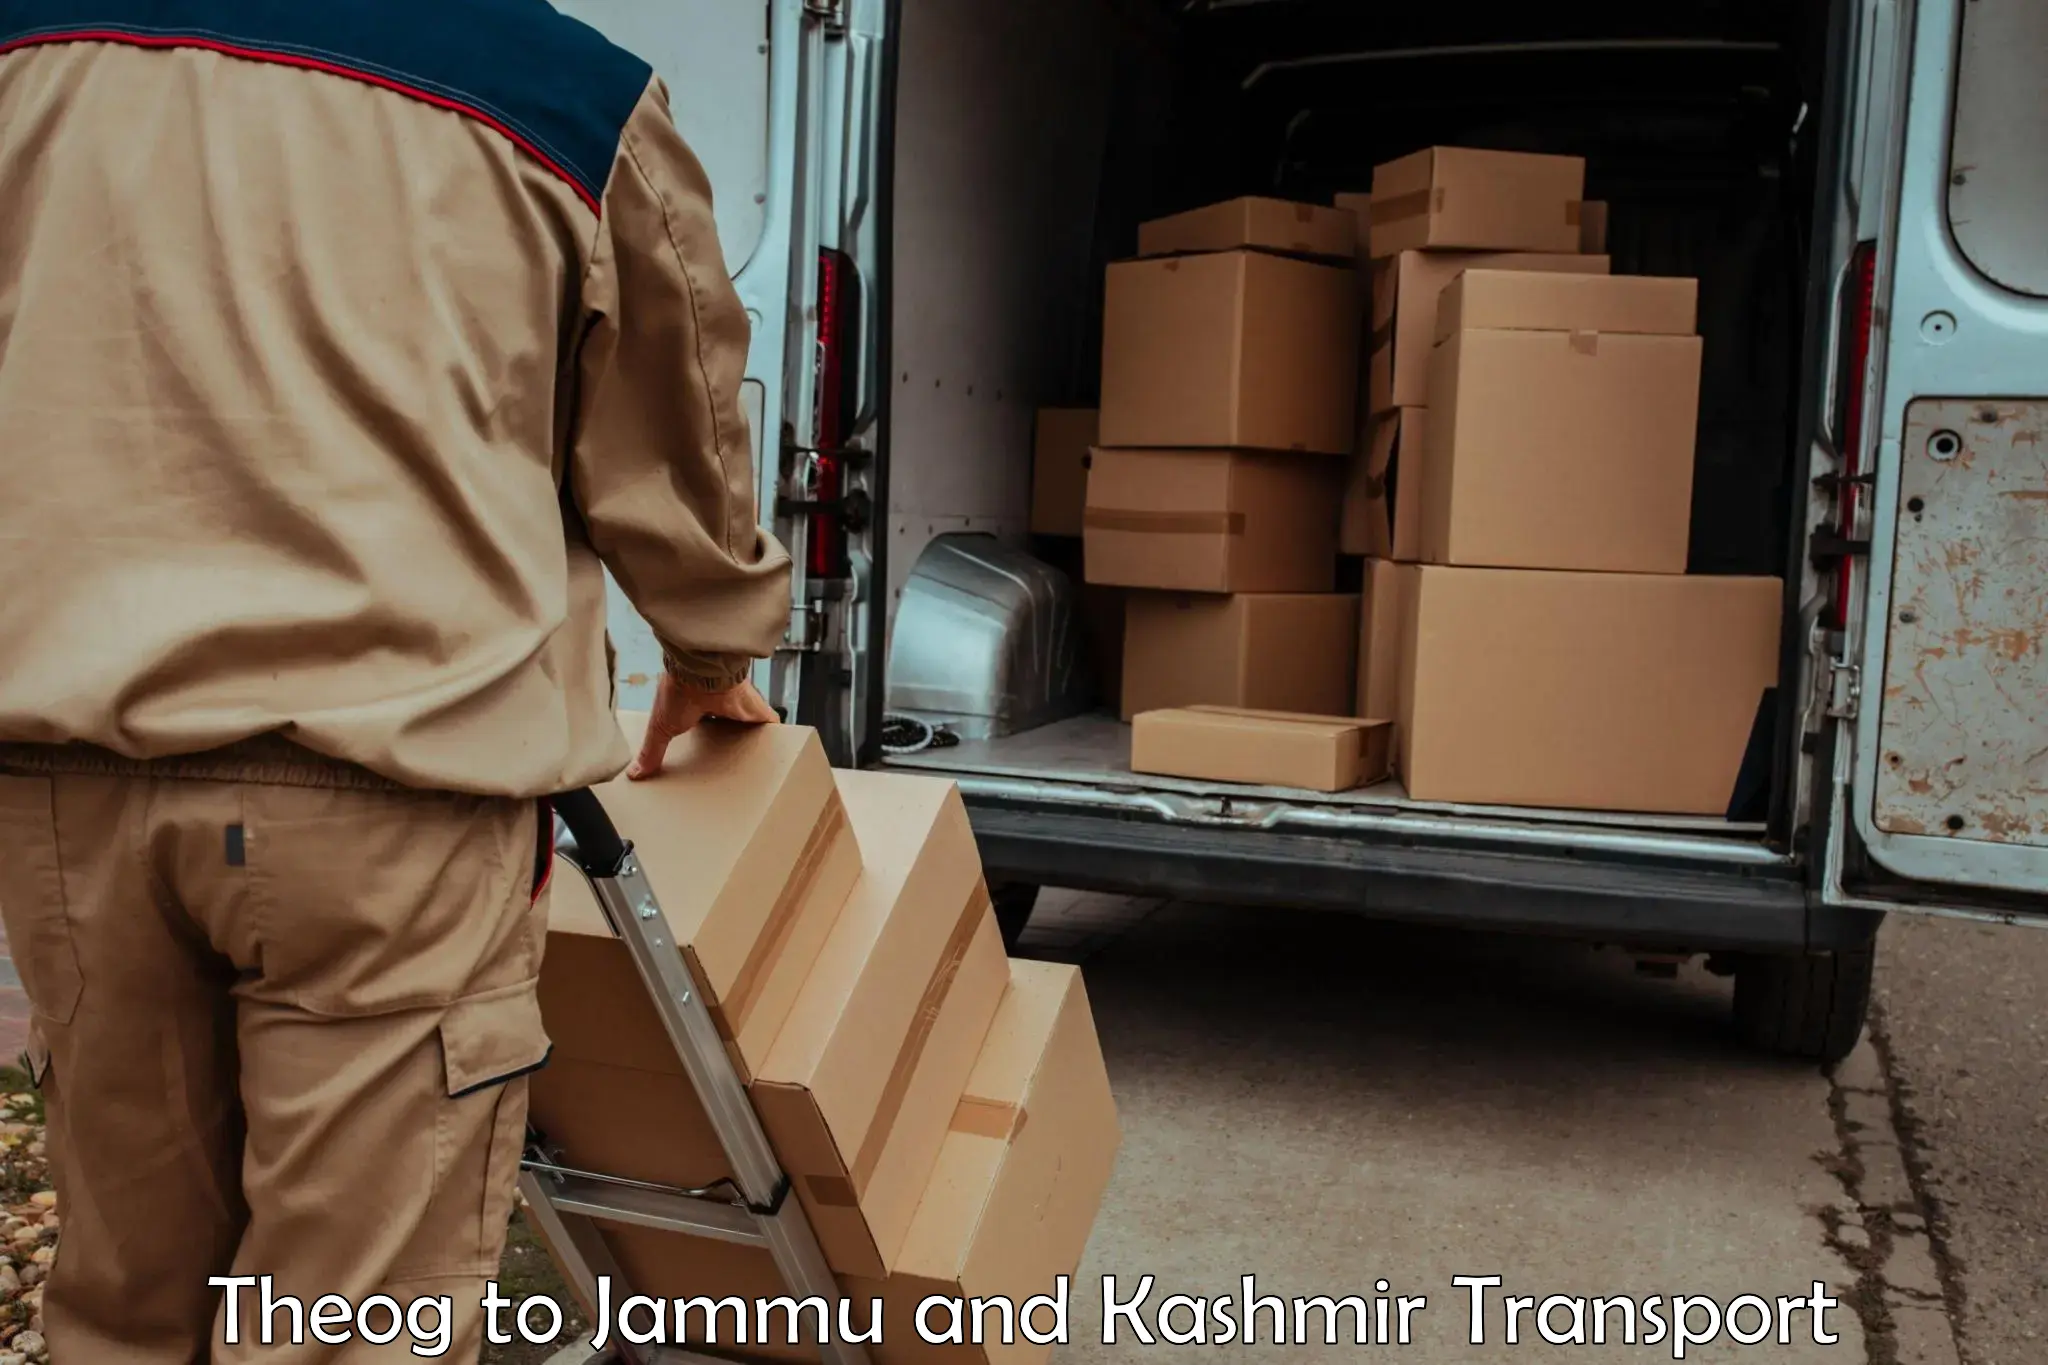 Express transport services in Theog to Jammu and Kashmir